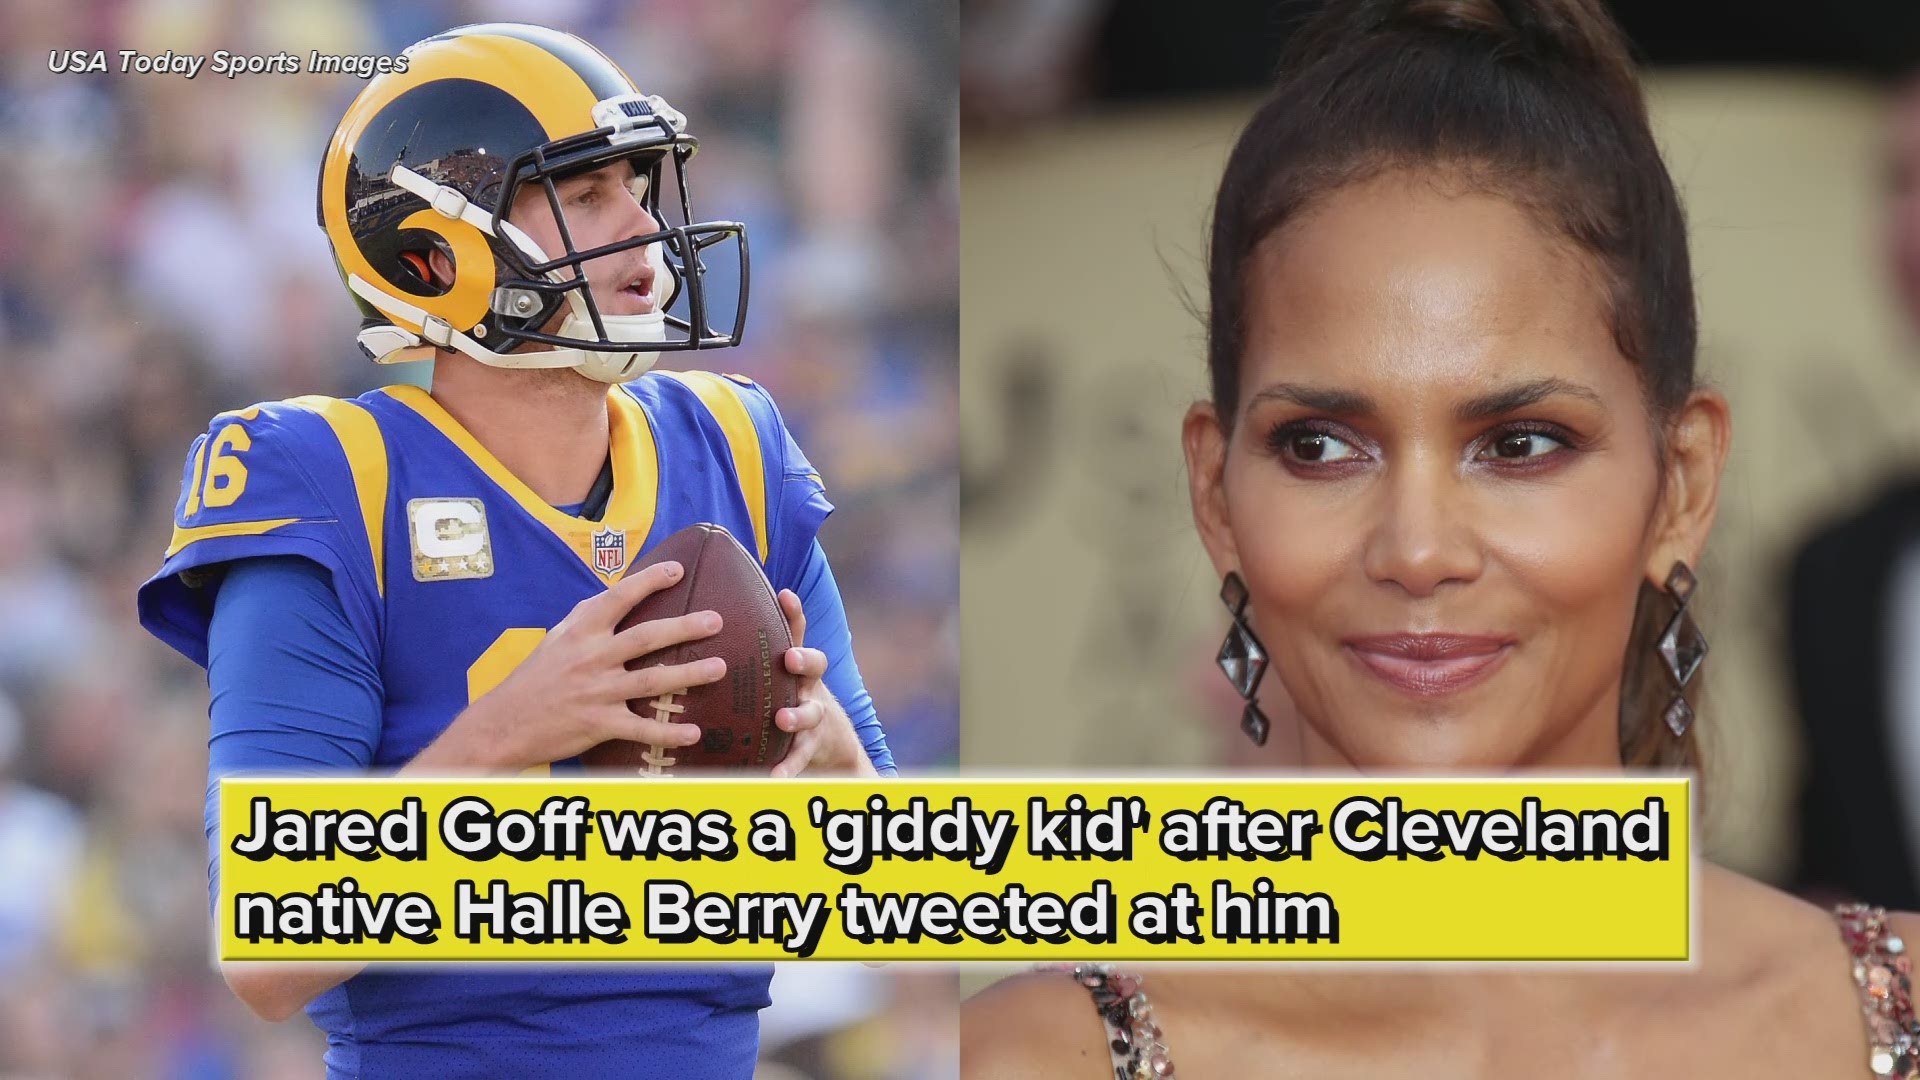 Los Angeles Rams QB Jared Goff was a 'giddy kid' after Cleveland native Halle Berry tweeted at him